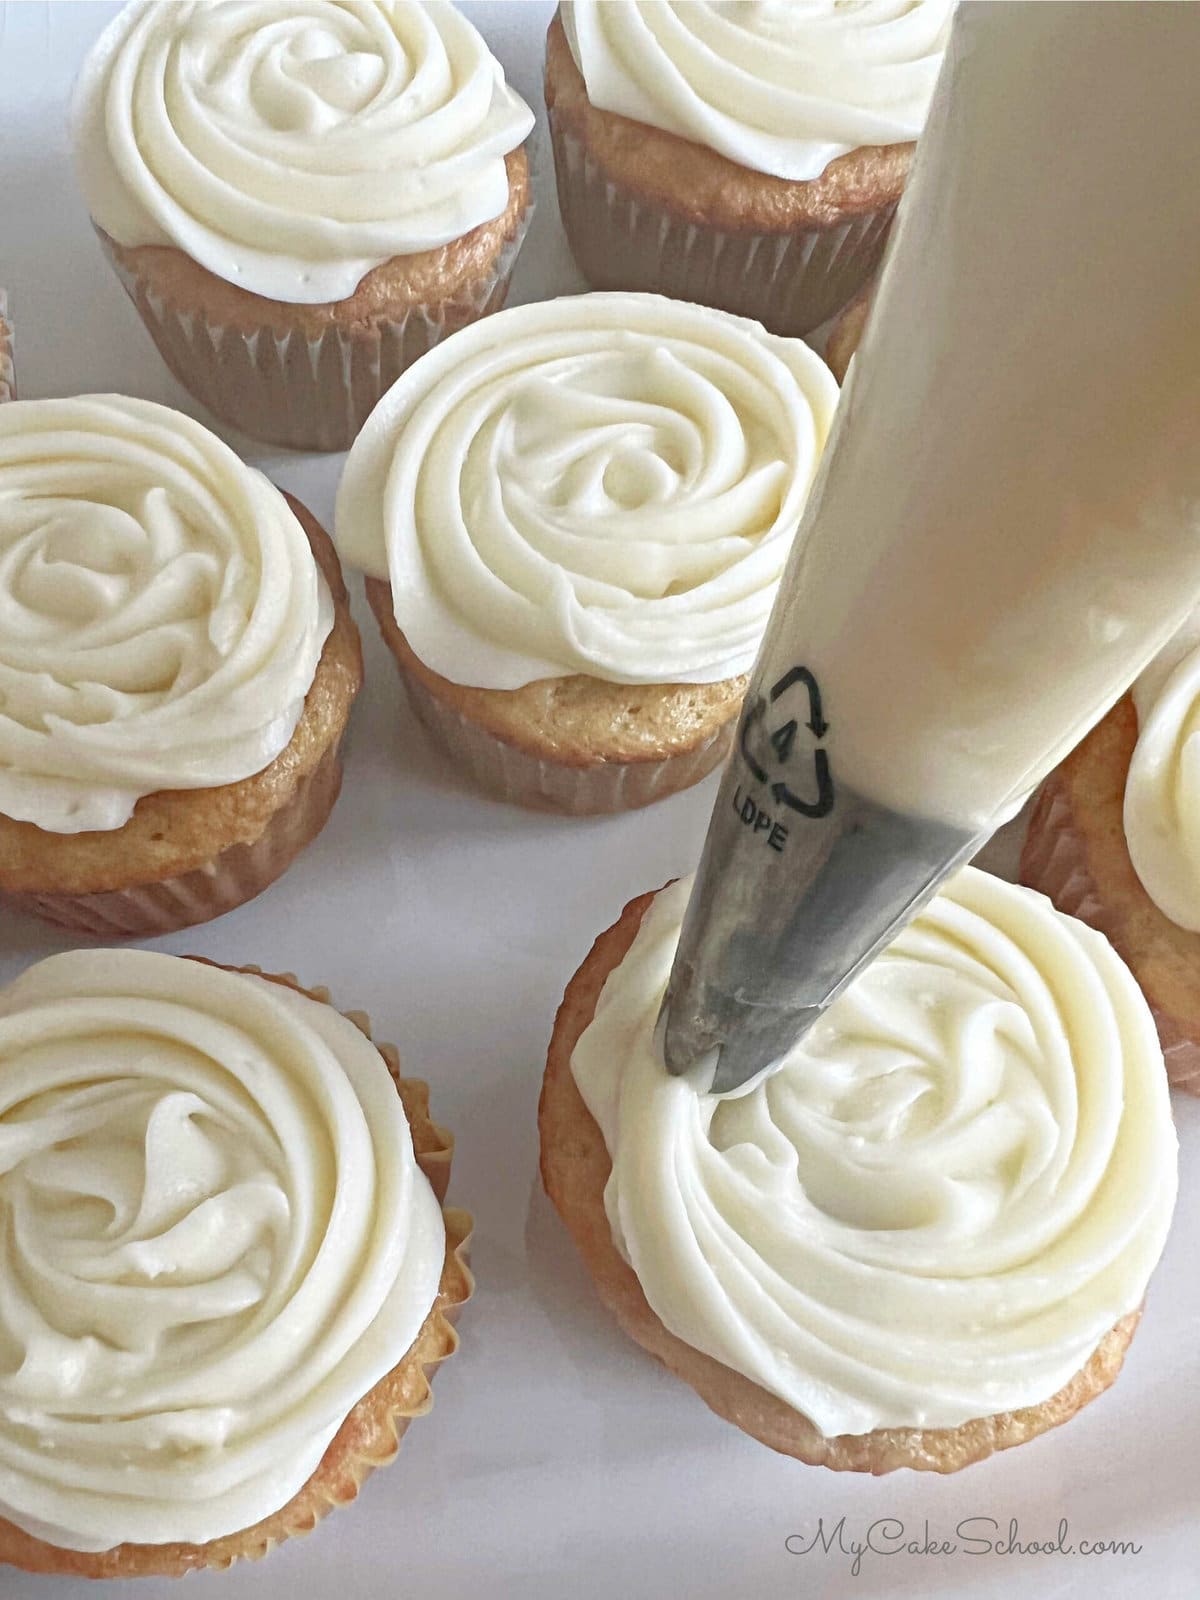 Frosting Cupcakes with swirls of Cream Cheese Frosting